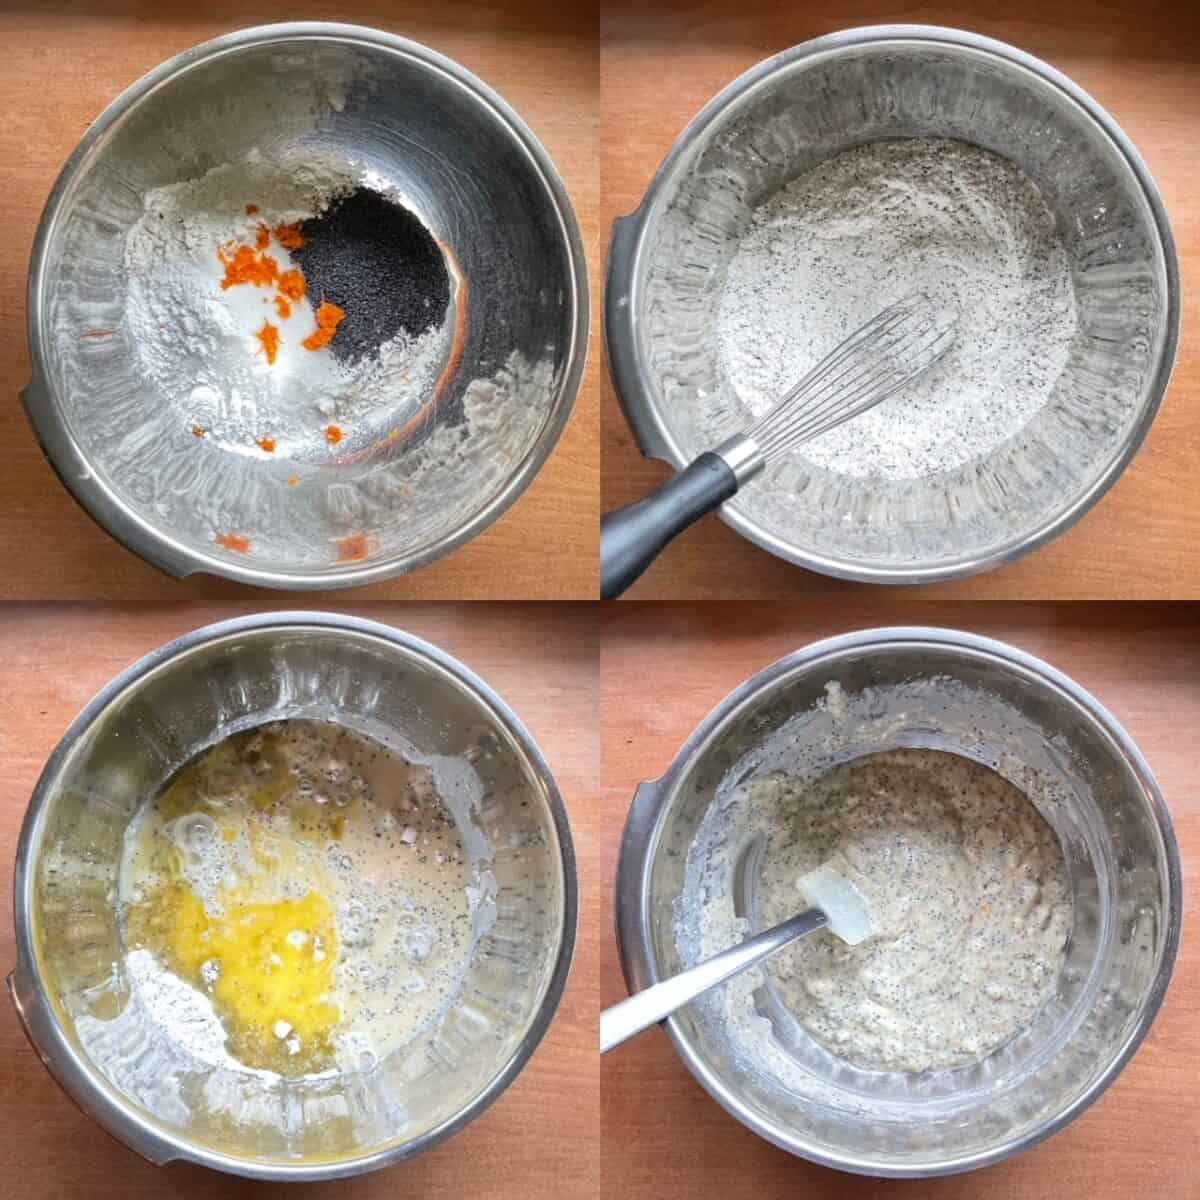 Four panels showing the steps in making the orange and poppy seed muffins.